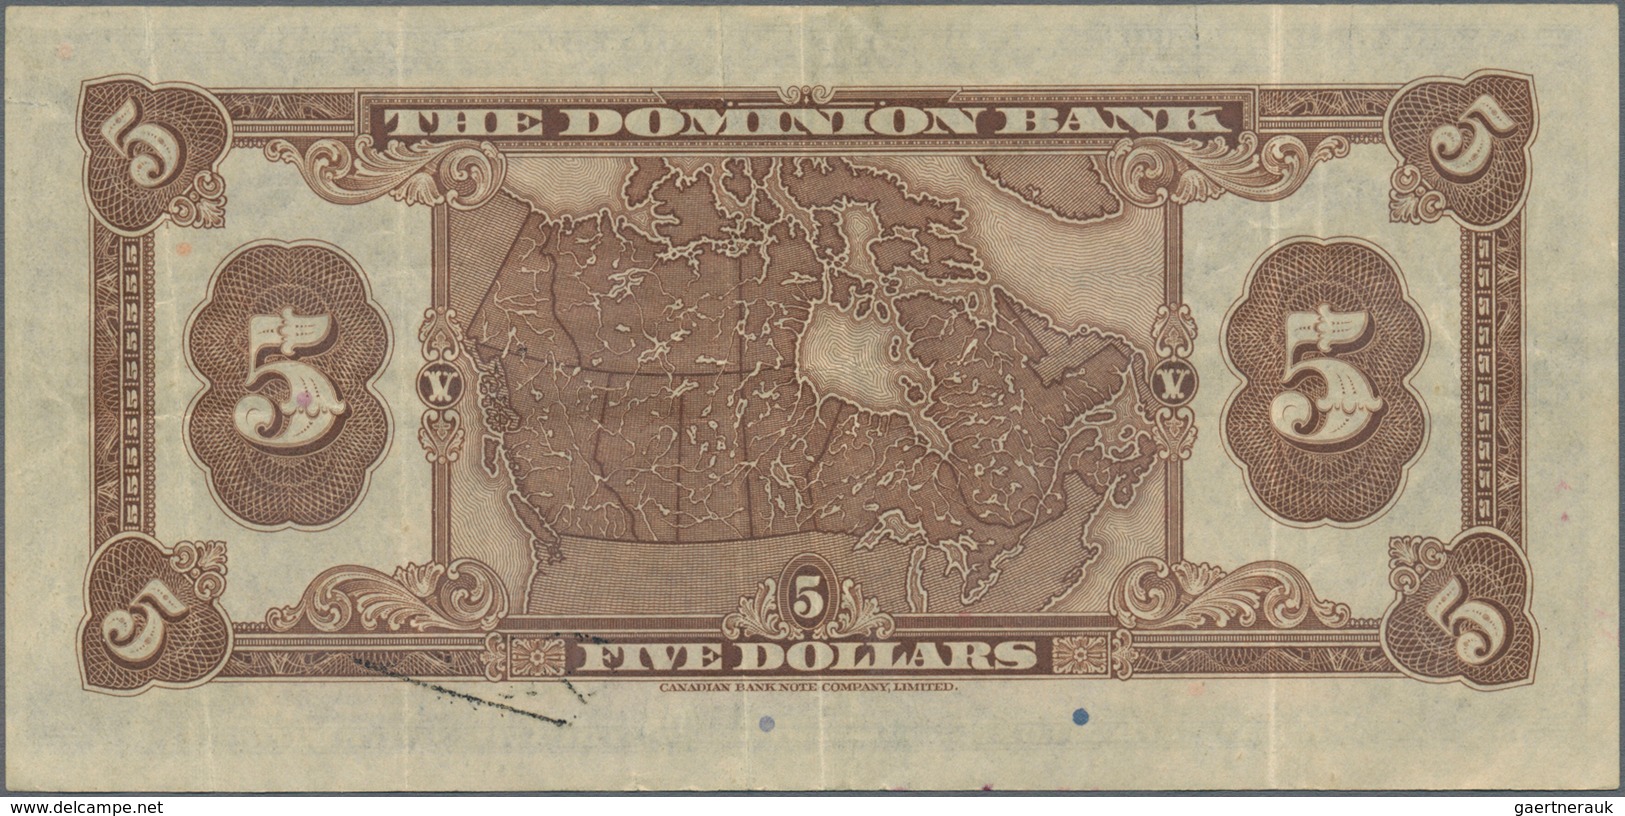 Canada: The Dominion Bank 5 Dollars 1938 P.S561 (VF) And The Bank Of Montreal 10 Dollars 1938 P.S562 - Kanada